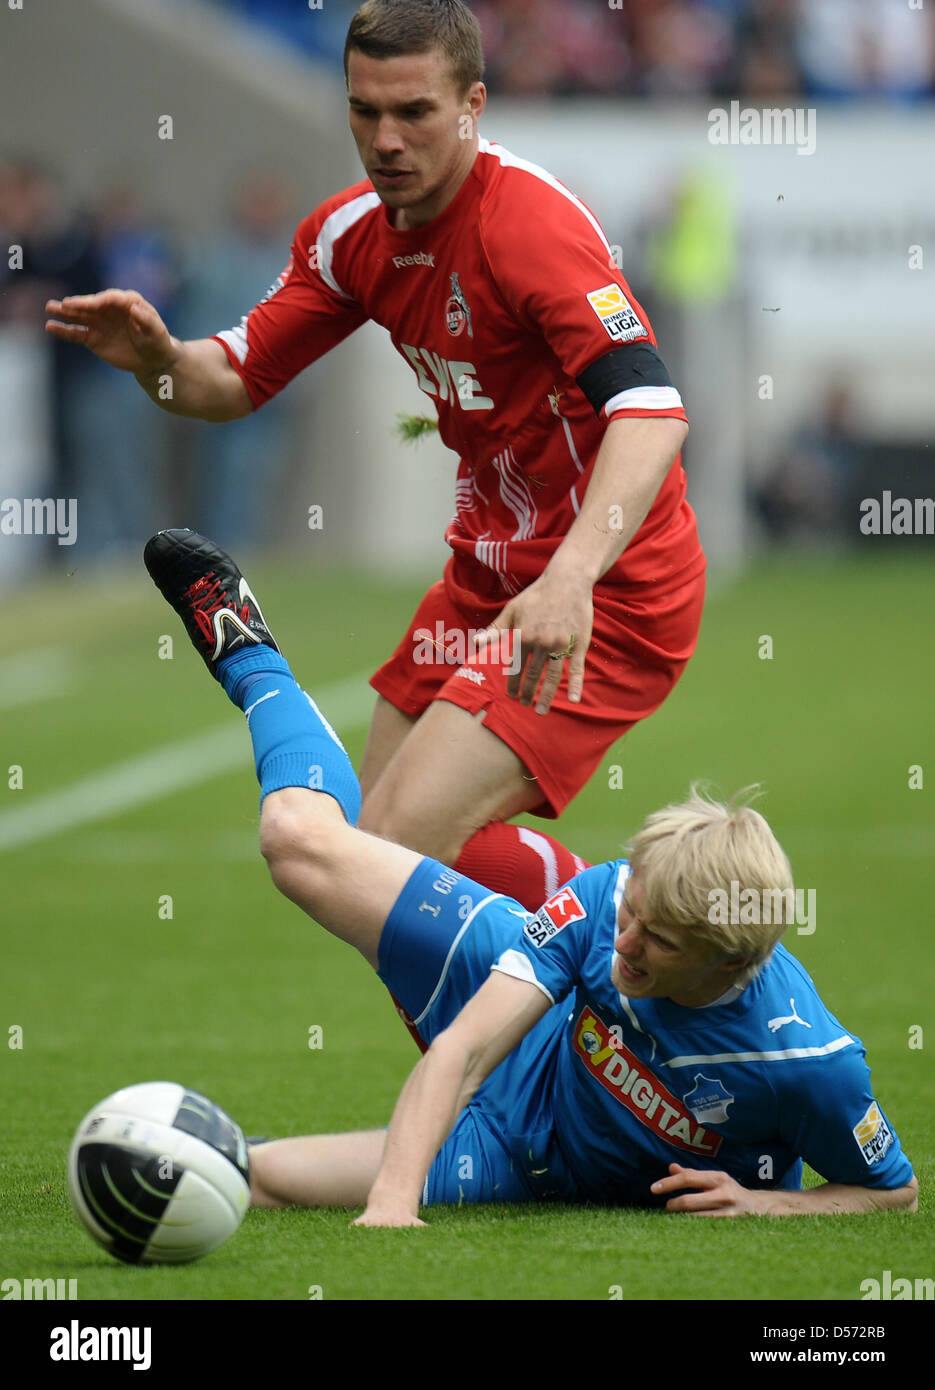 Cologne's Lukas Podolski wears a crape on his arm while he vies for the ball with Hoffenheim's Andreas Beck during German Bundesliga match TSG Hoffenheim vs Cologne at Rhein-Neckar-Arena in Sinsheim, Germany, 10 April 2010. The German National player and several others from Poland wore crapes during the matches. ''Since I was born in Poland and have a Polish heart, it is very sad a Stock Photo